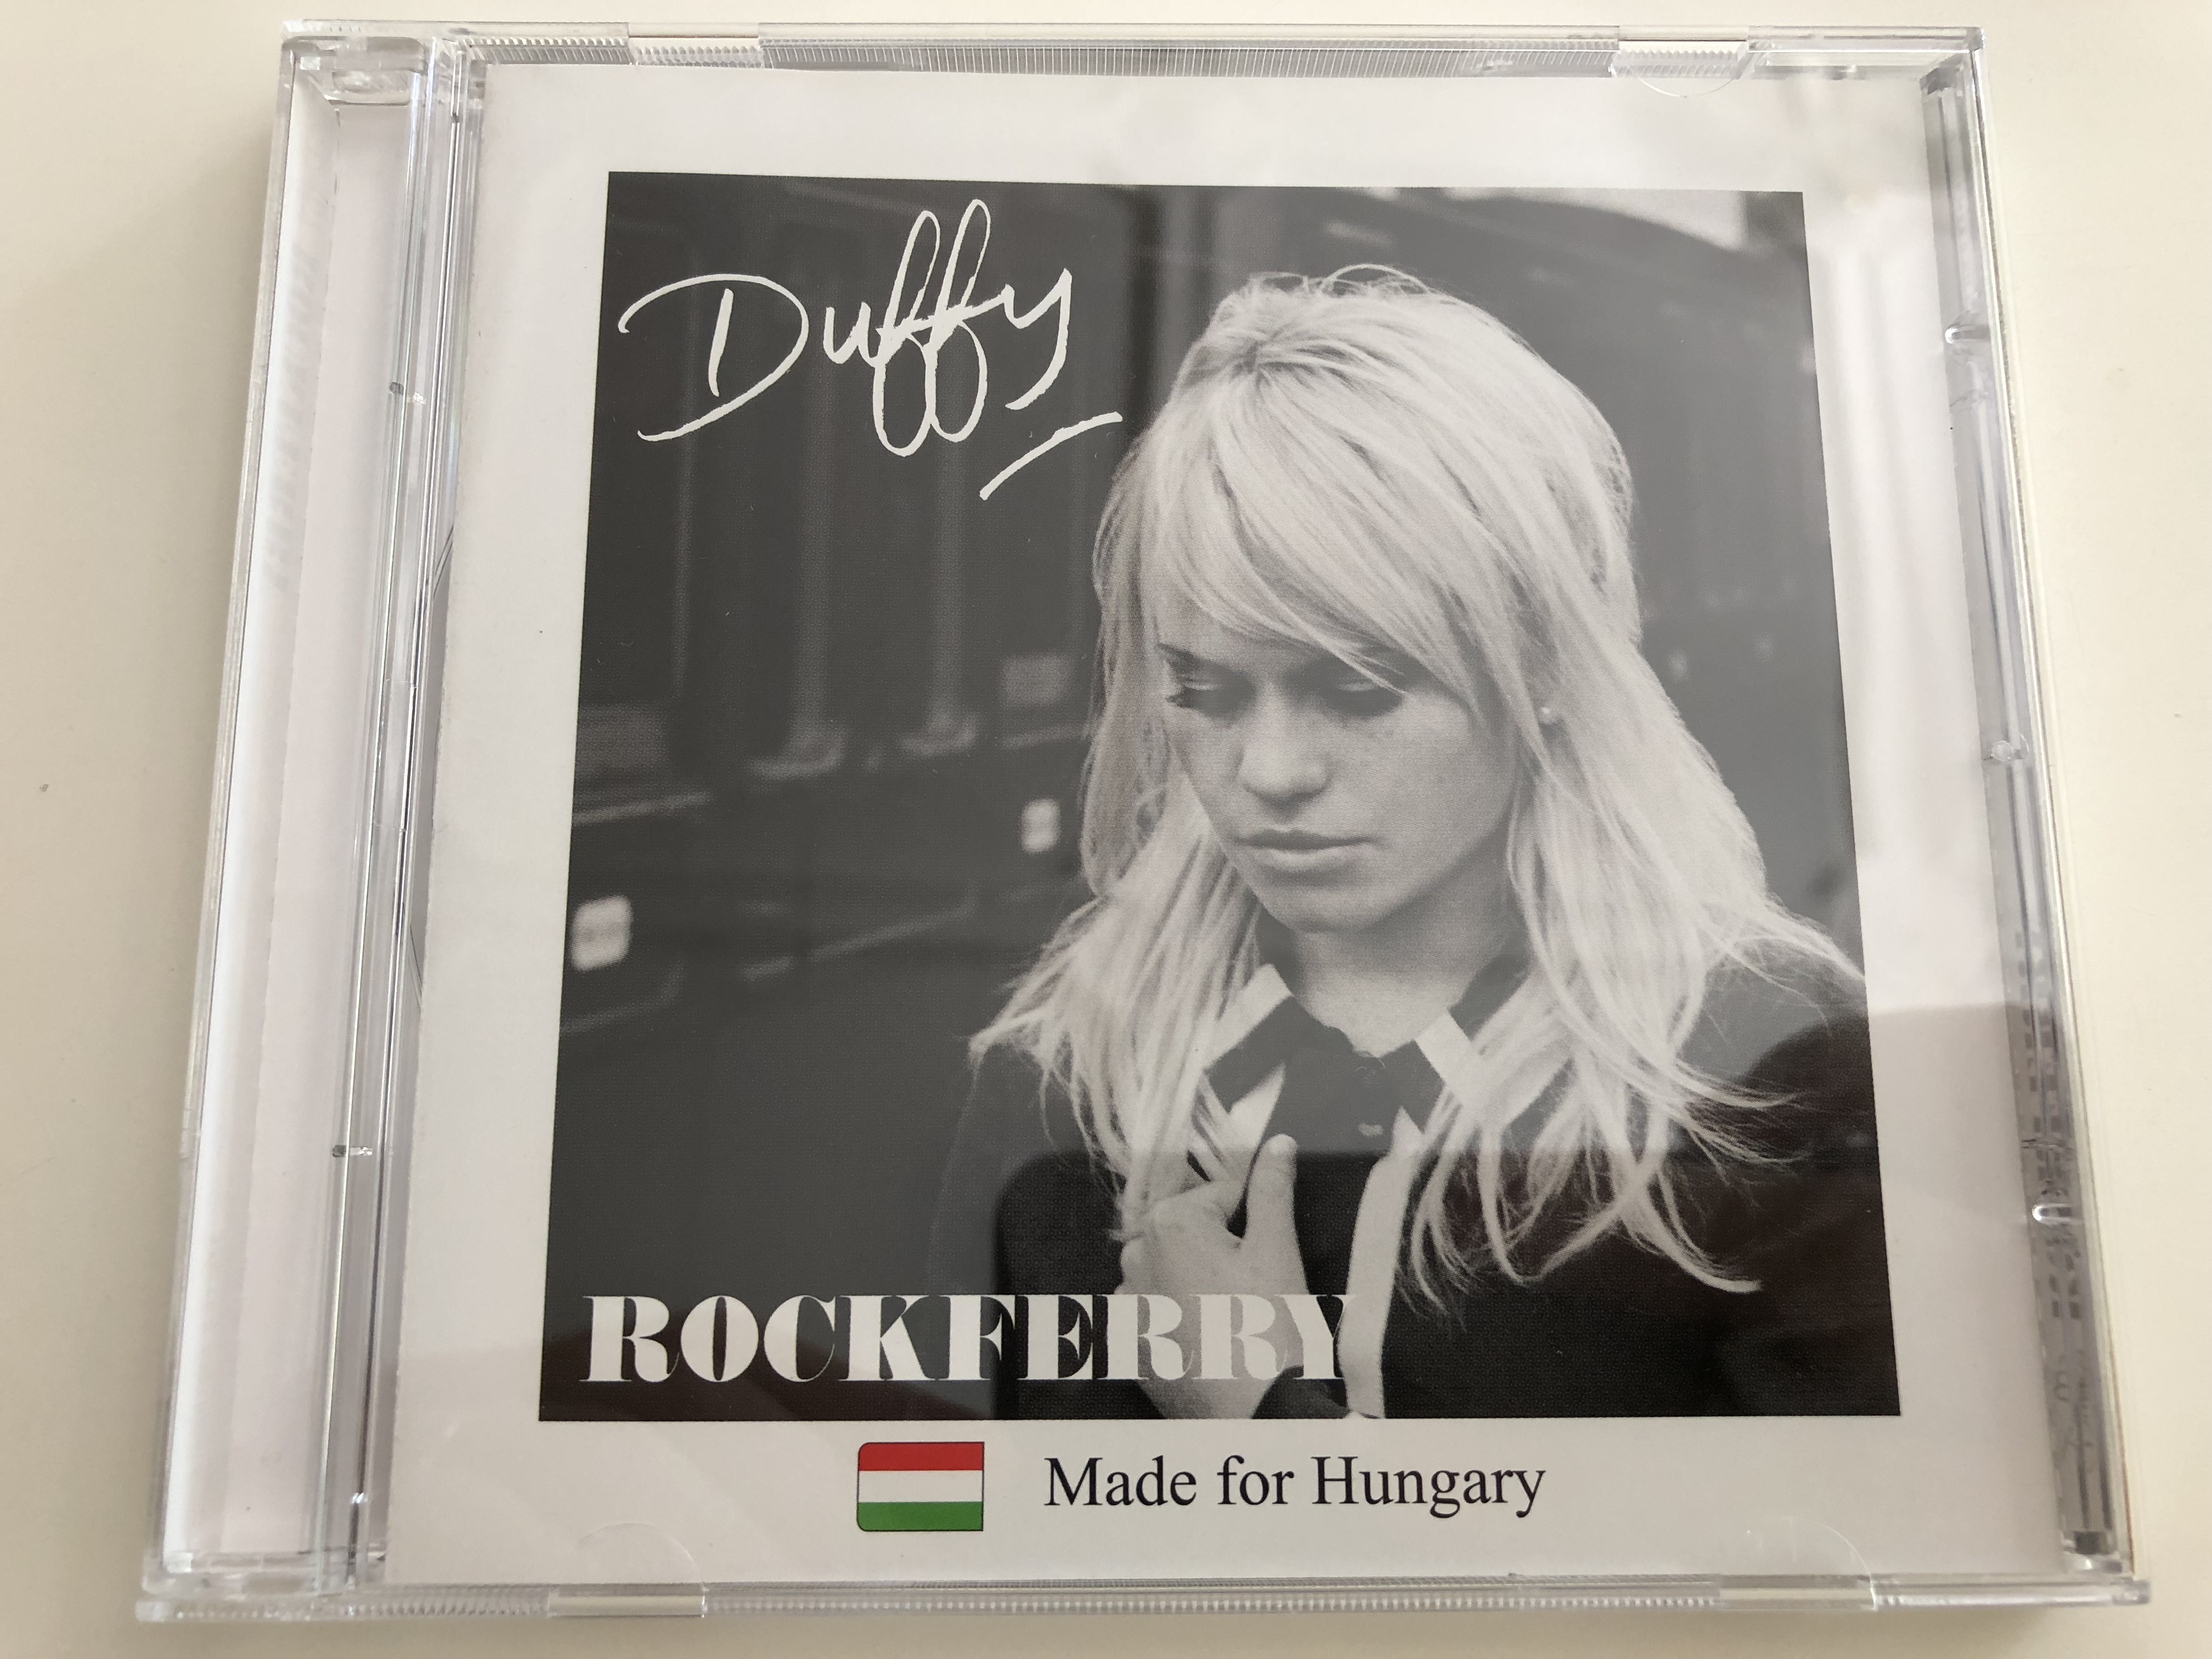 Sindsro dæk Bytte Duffy - Rockferry / Made for Hungary / Serious, Stepping Stone, Mercy,  Distant Dreamer / Audio CD 2008 / Polydor 176297-5 - bibleinmylanguage